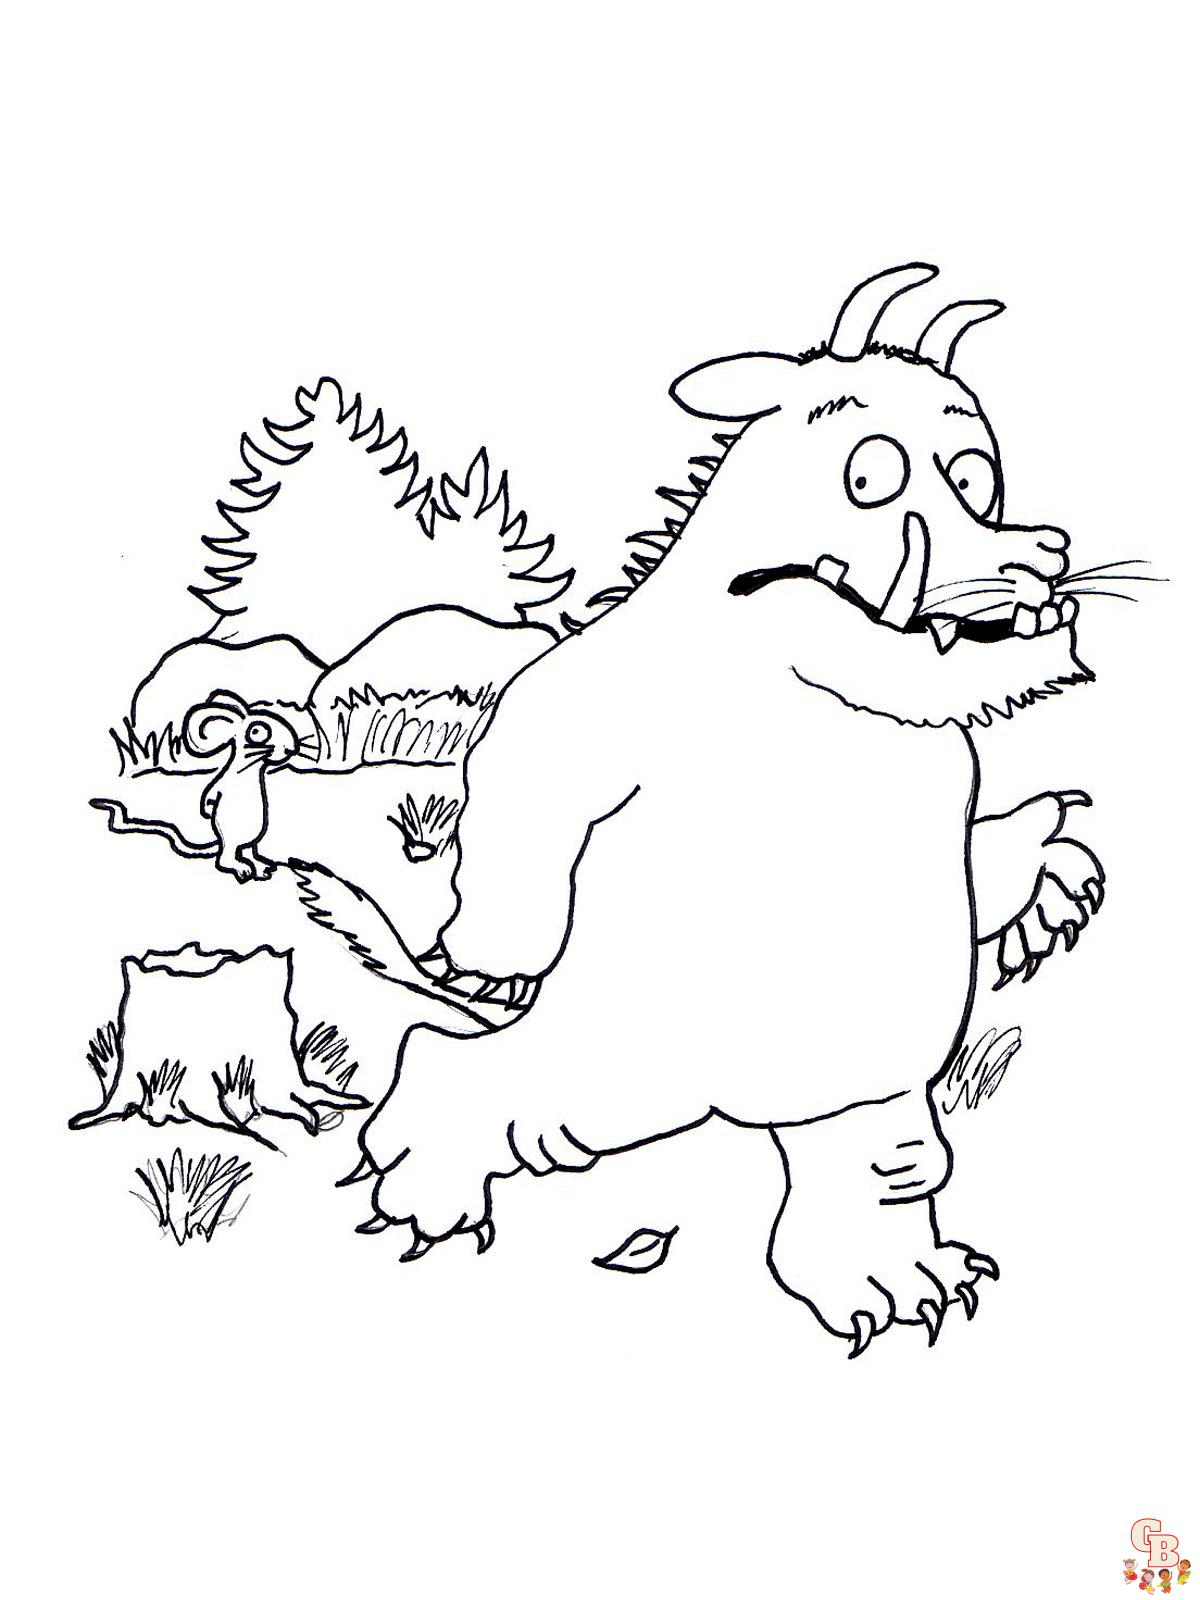 Gruffalo Coloring Pages 1